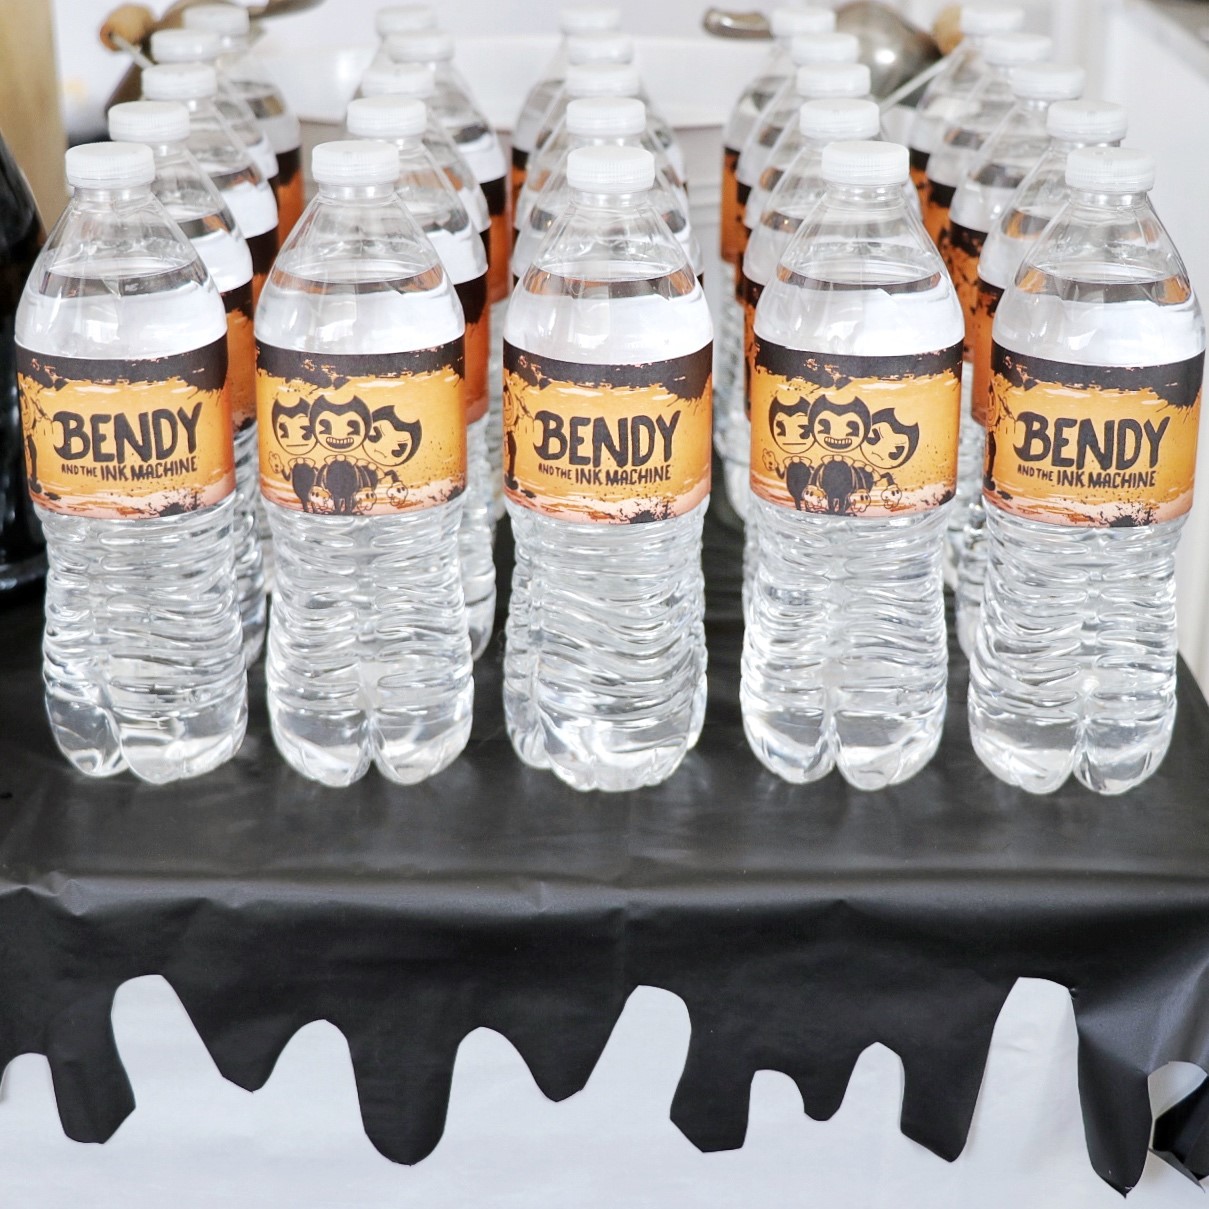 Food and decor idea for a Bendy birthday party: free printable BATIM water bottle labels